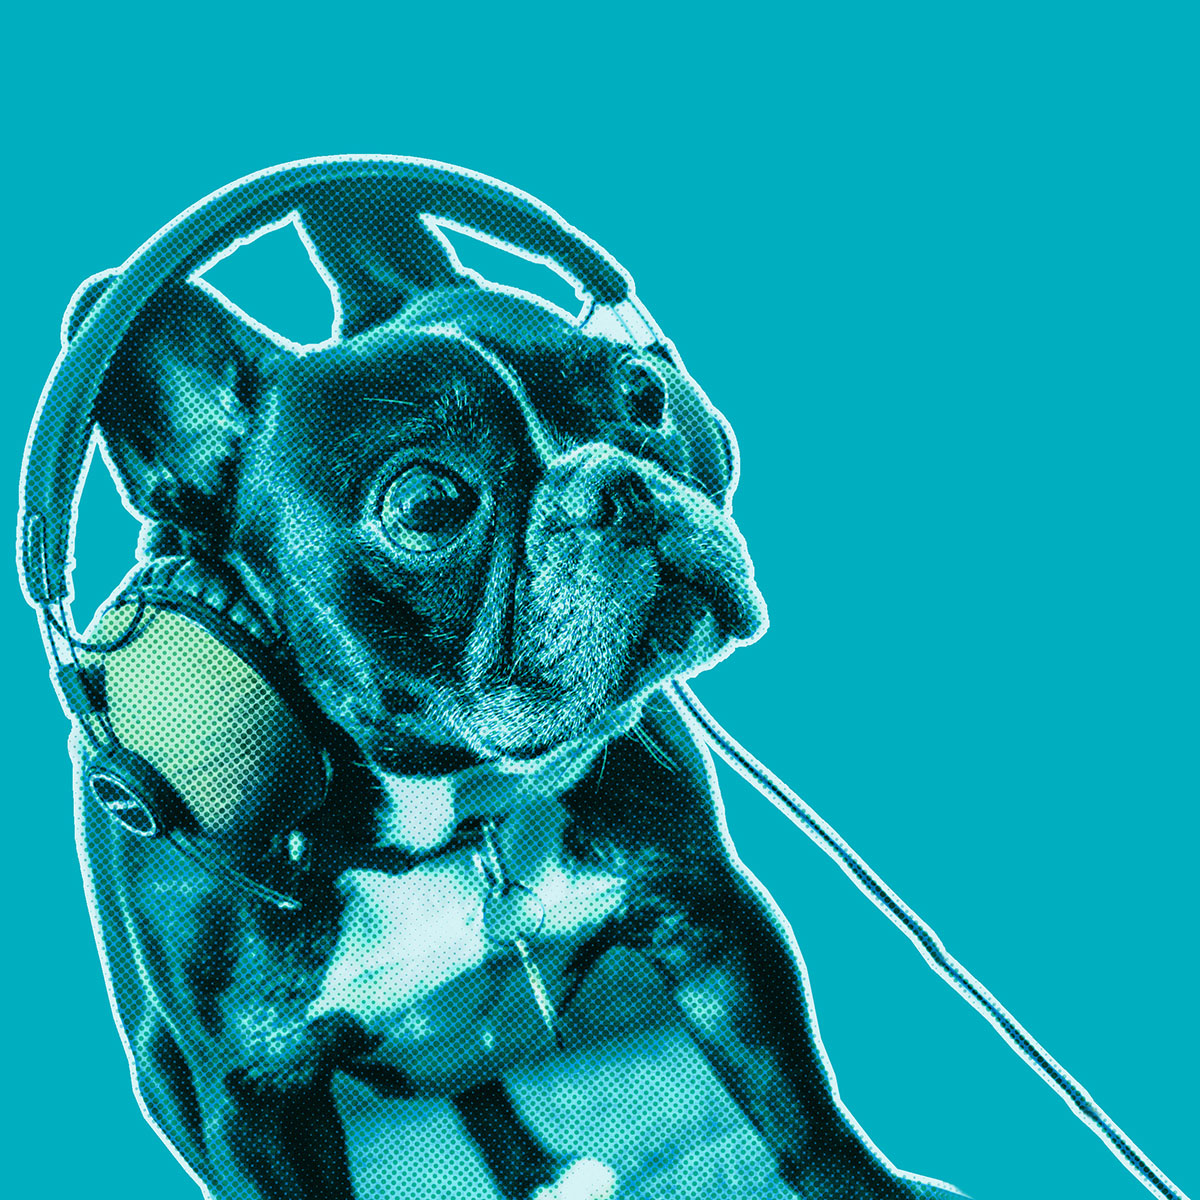 Turquoise-filtered picture of a French Bulldog wearing headphones